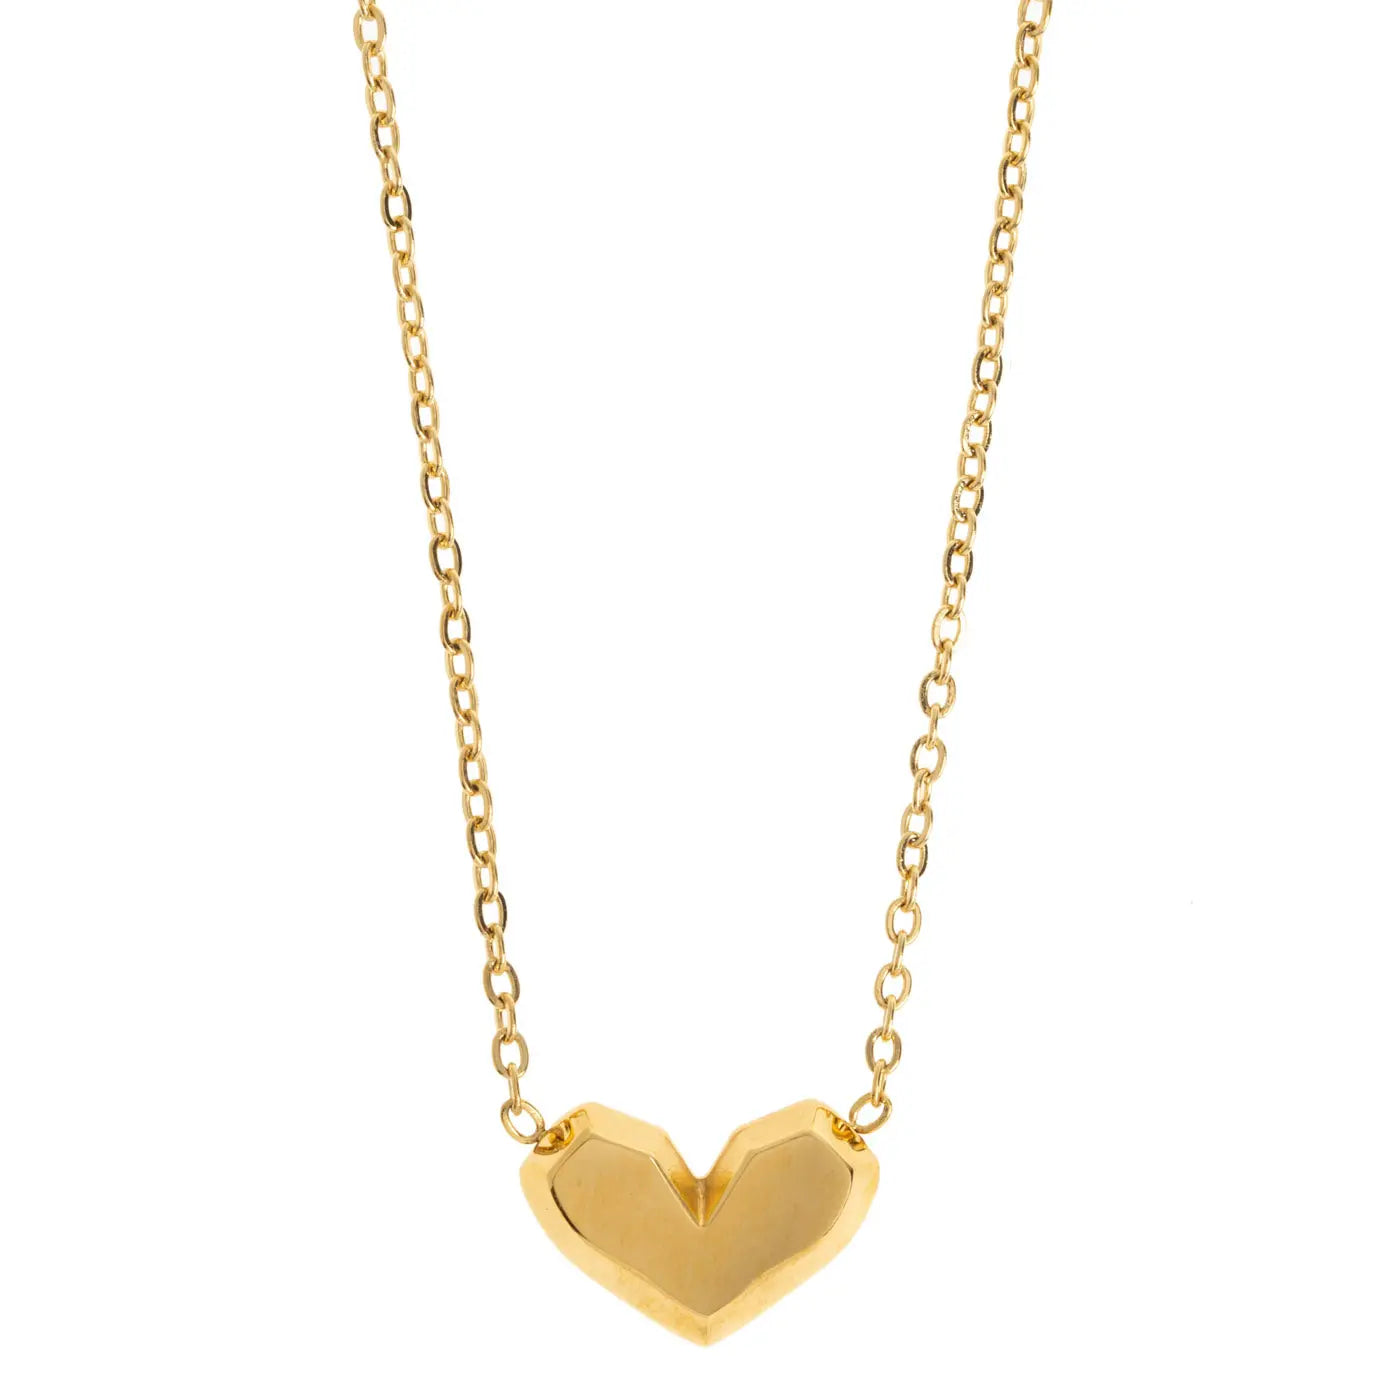 Eloise - Simple Heart Necklace Stainless Steel